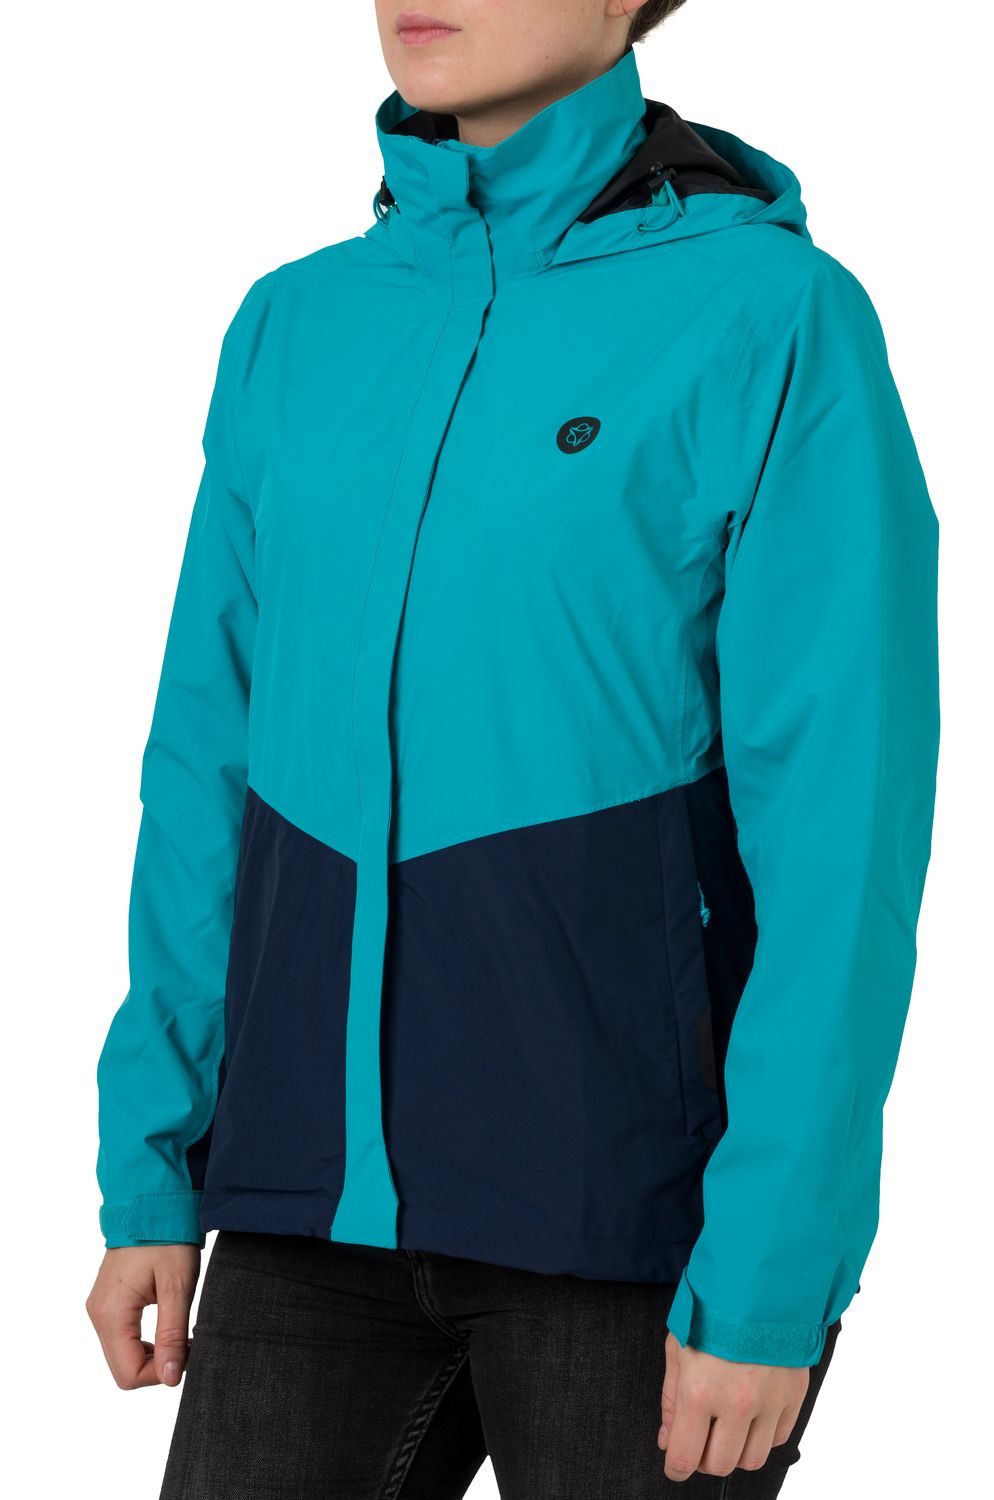 Section Chaqueta de lluvia Essential Mujeres fit example